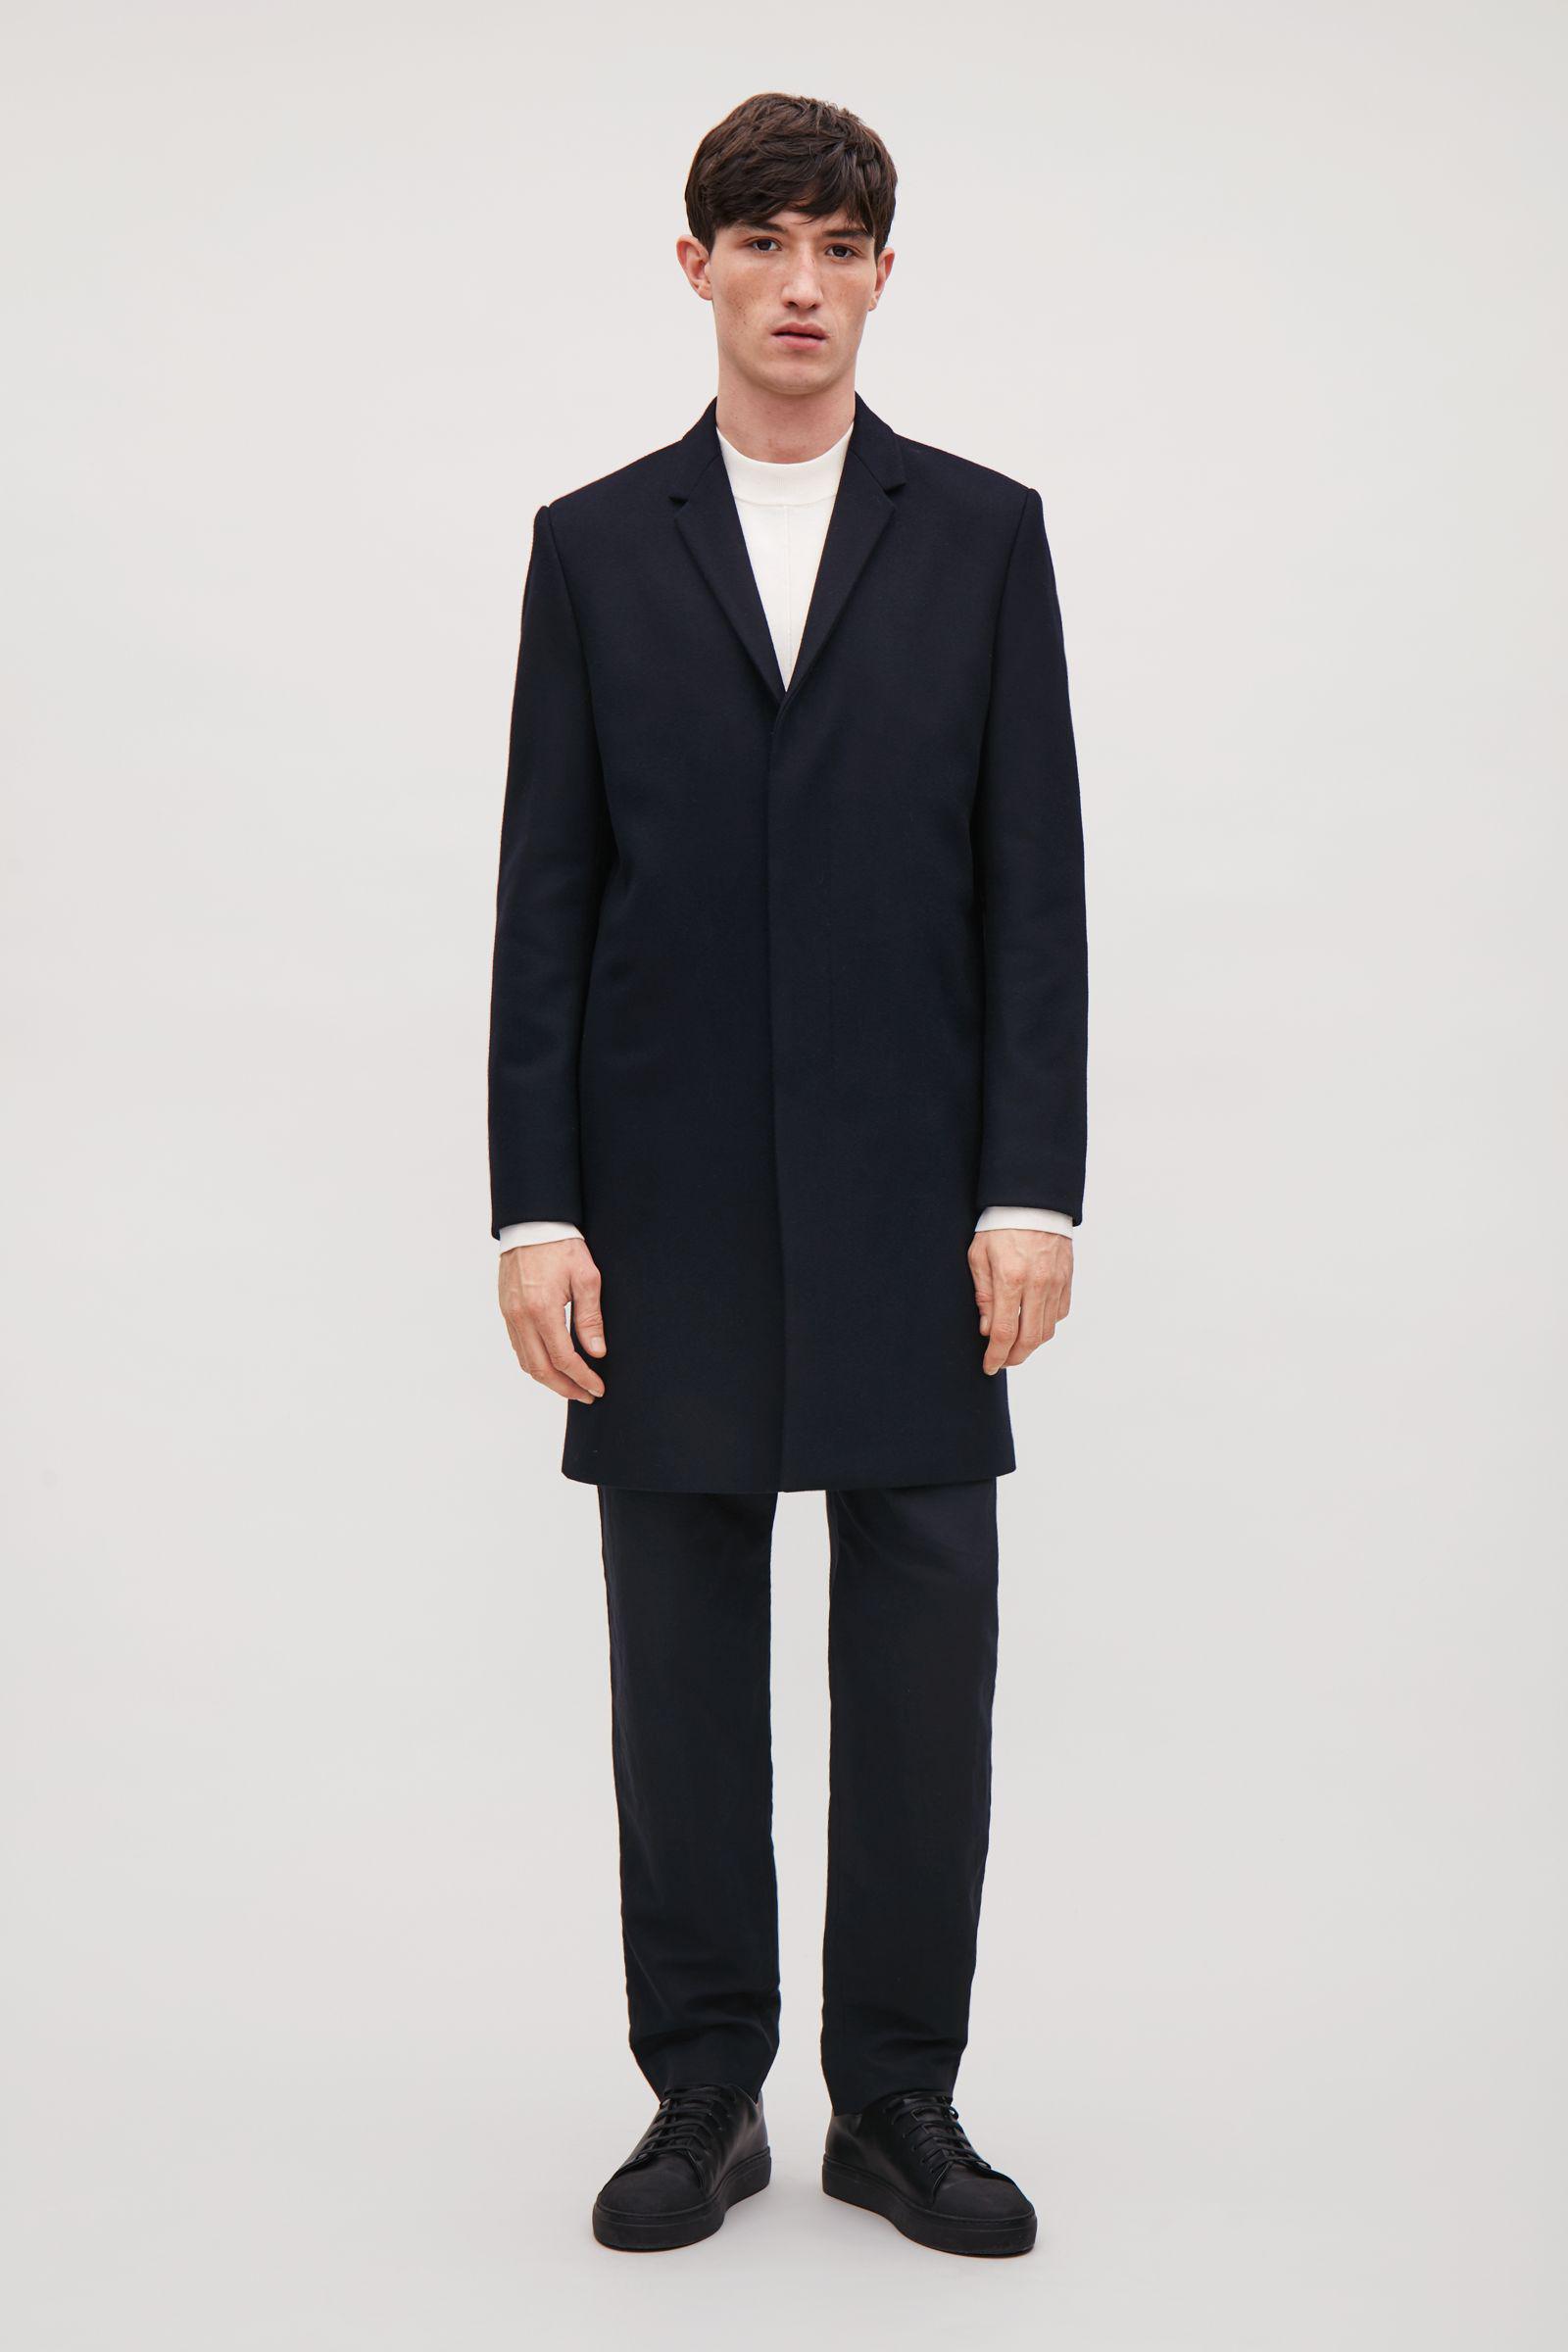 COS Wool Tailored Coat in Navy (Blue) for Men - Lyst